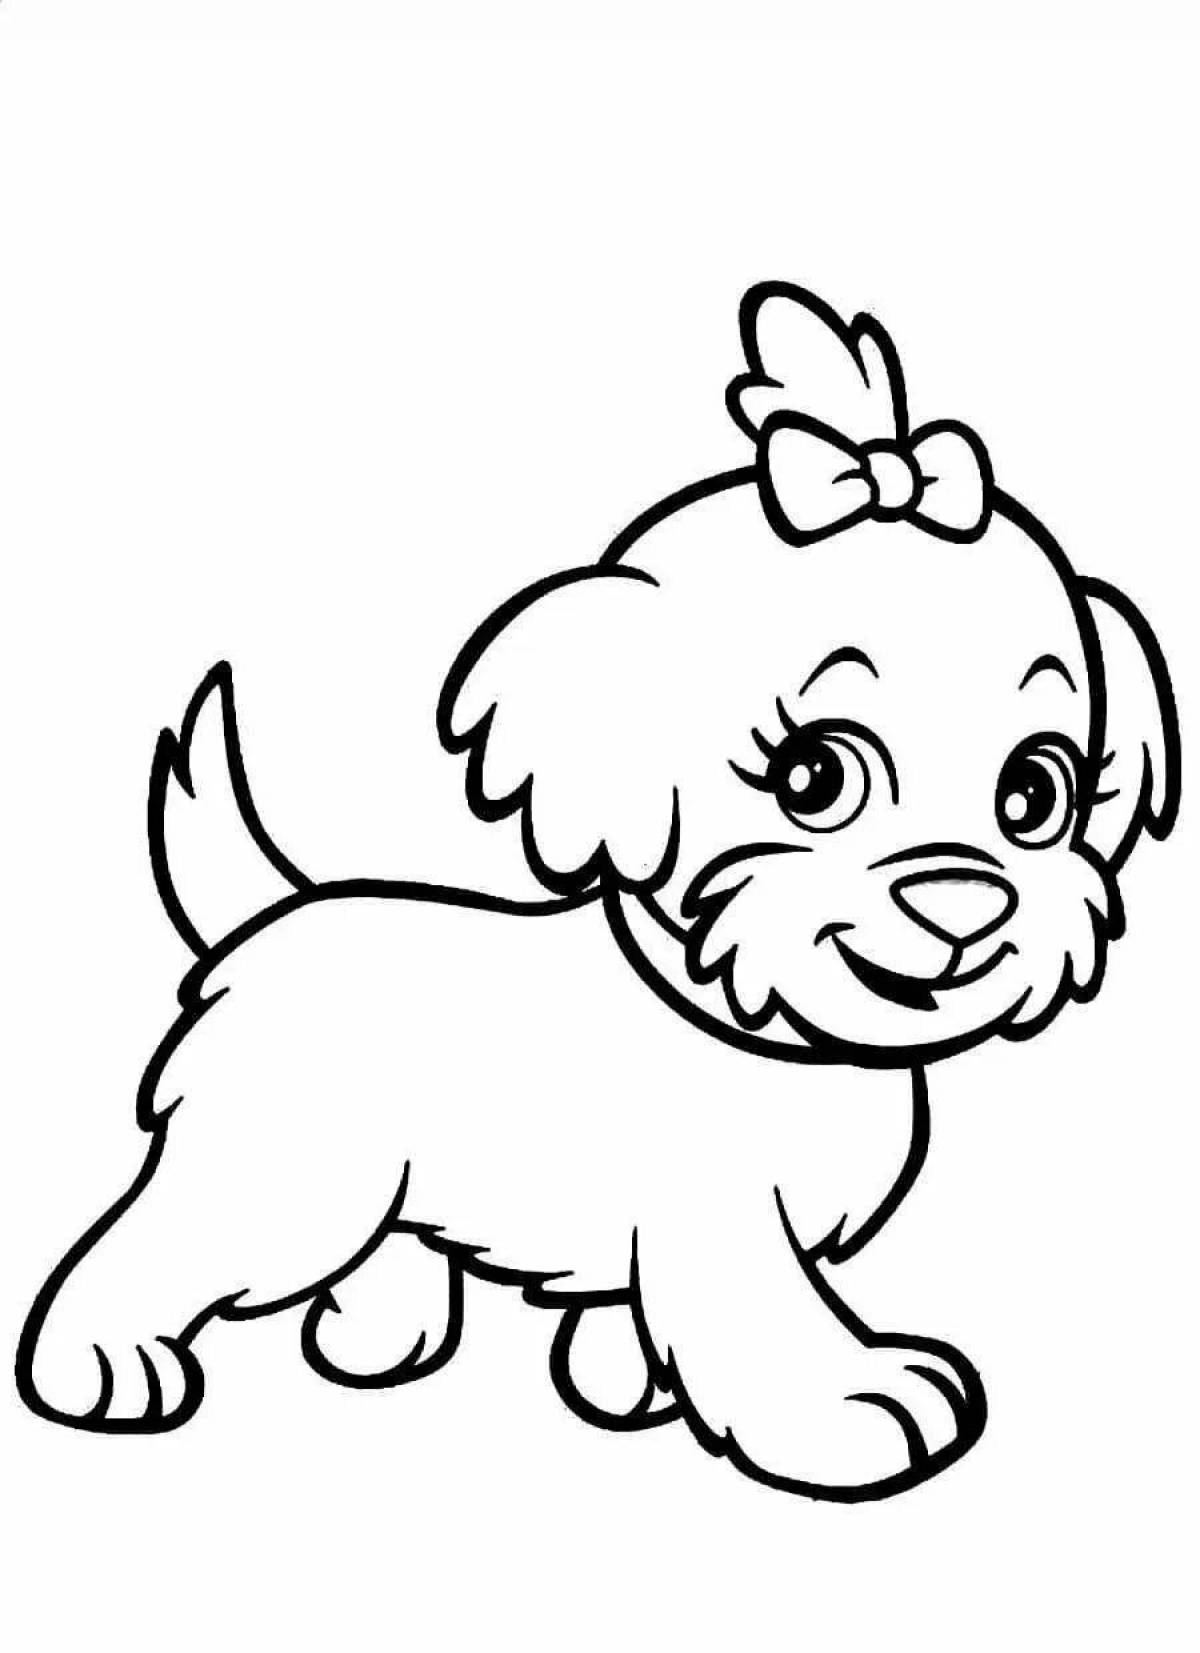 Colourful dog coloring pages for kids